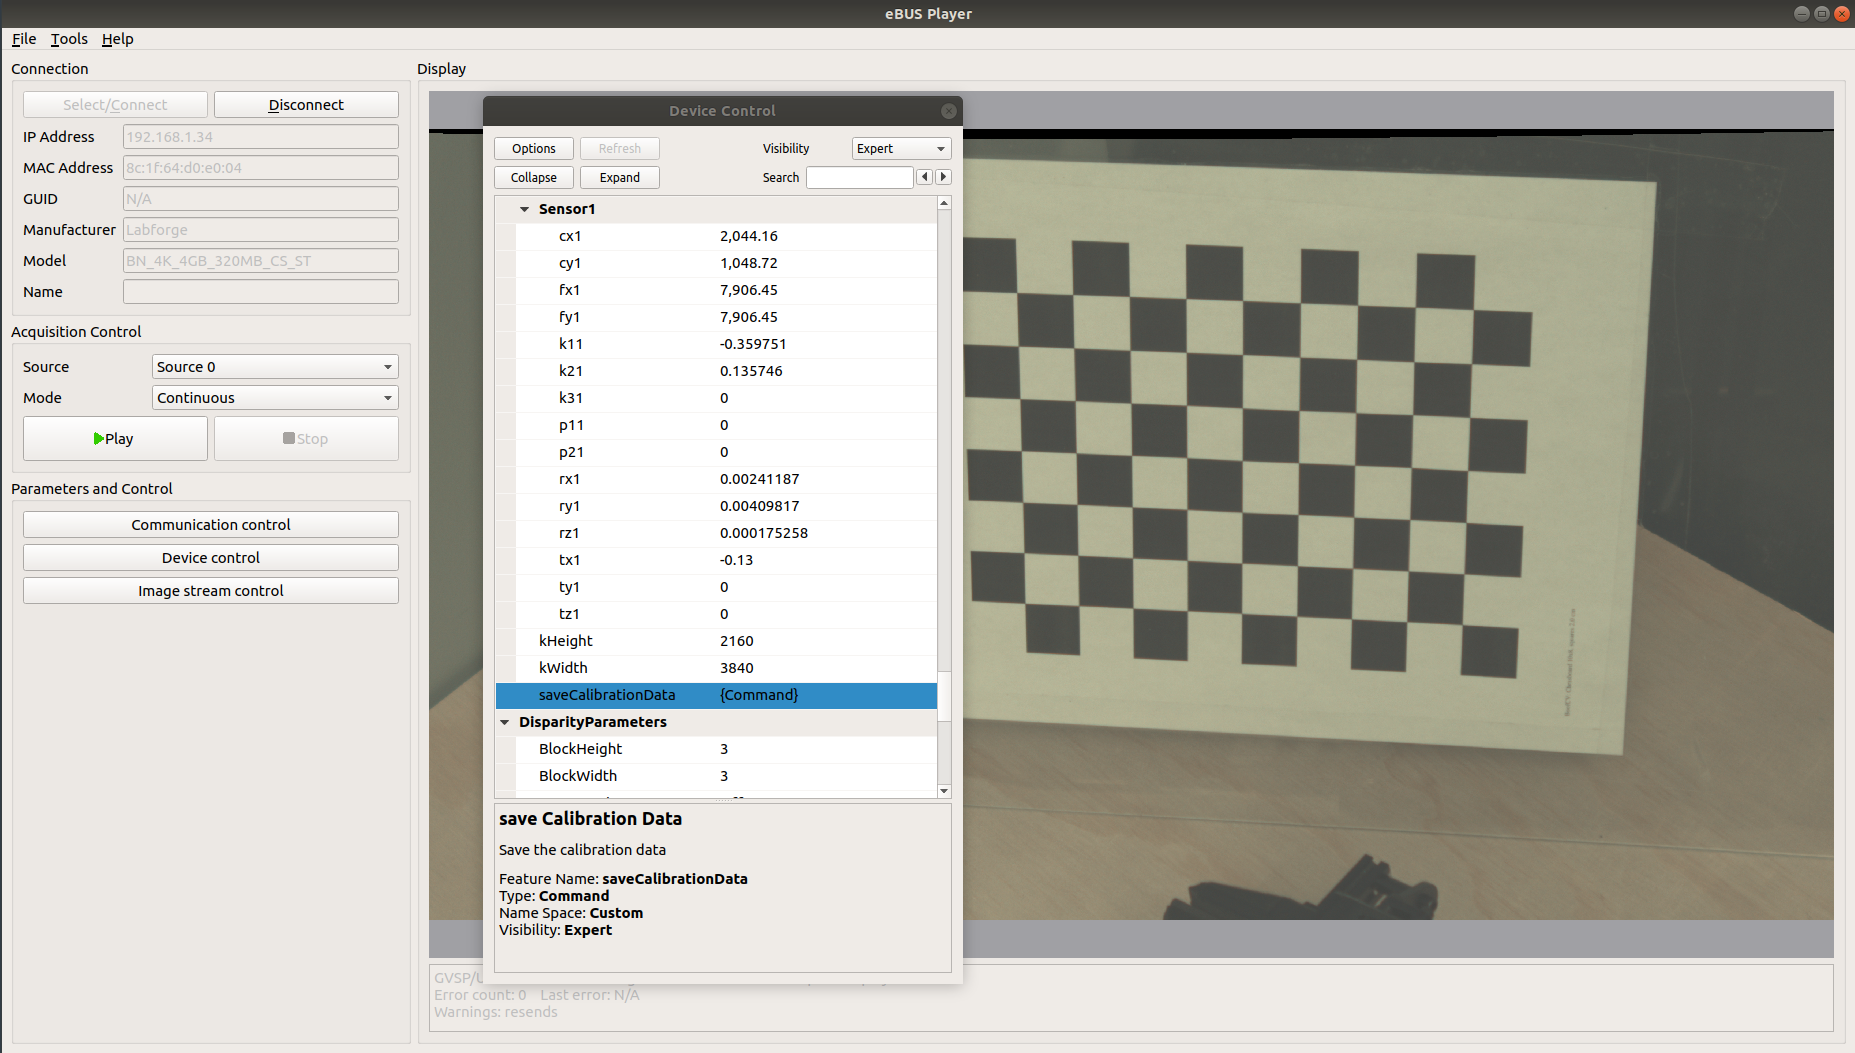 A screenshot of the eBusPlayer showing the Bottlenose calibration parameters with the `saveCalibrationData` button. 